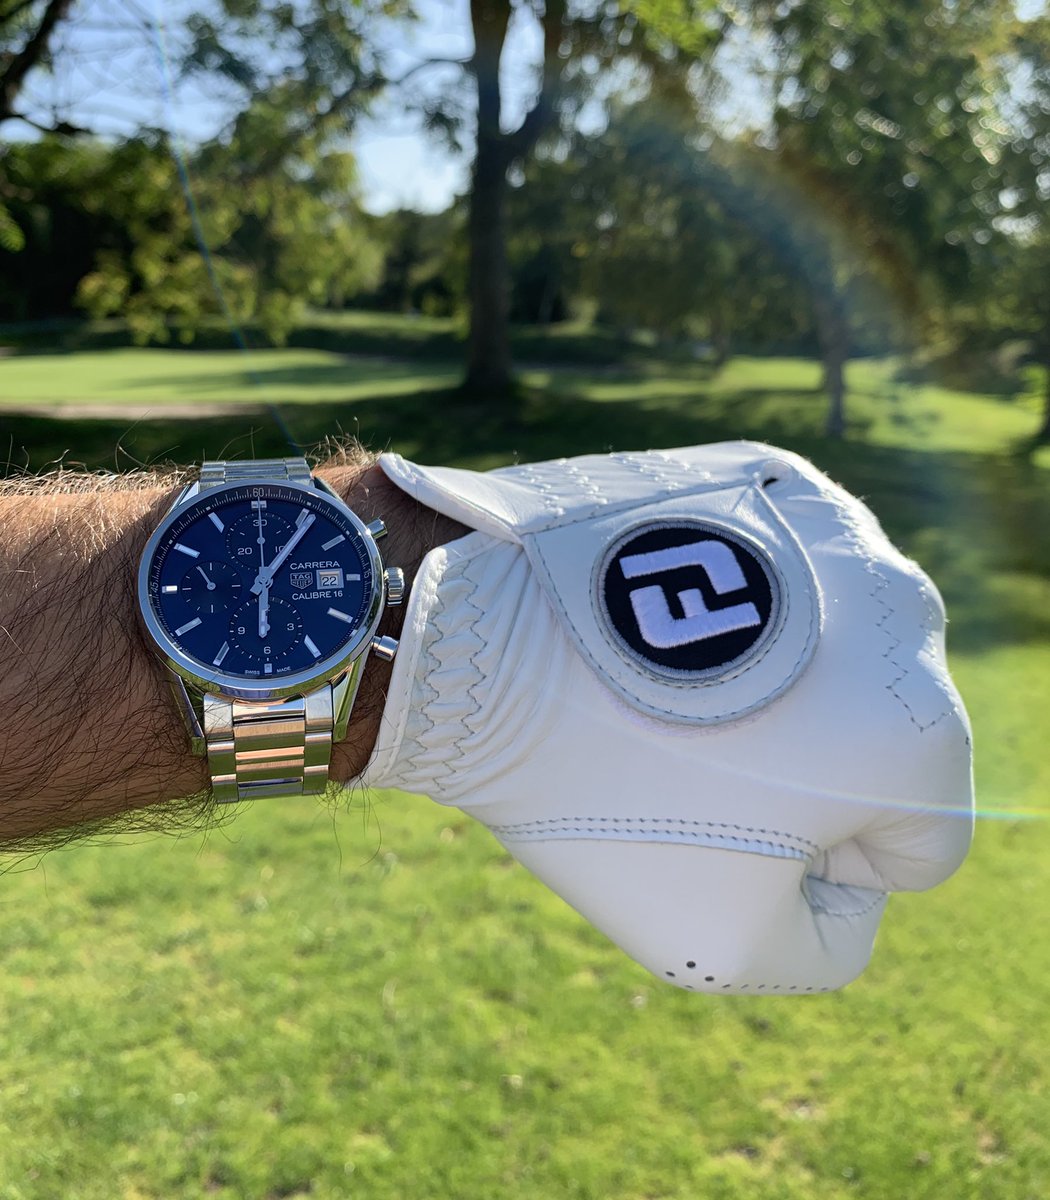 It’s FRIDAY and it’s TIME to play some Golf on Labor Day Weekend ⛳️🌴🇺🇸☀️
#FootJoy #PureTouch #1GloveInGolf